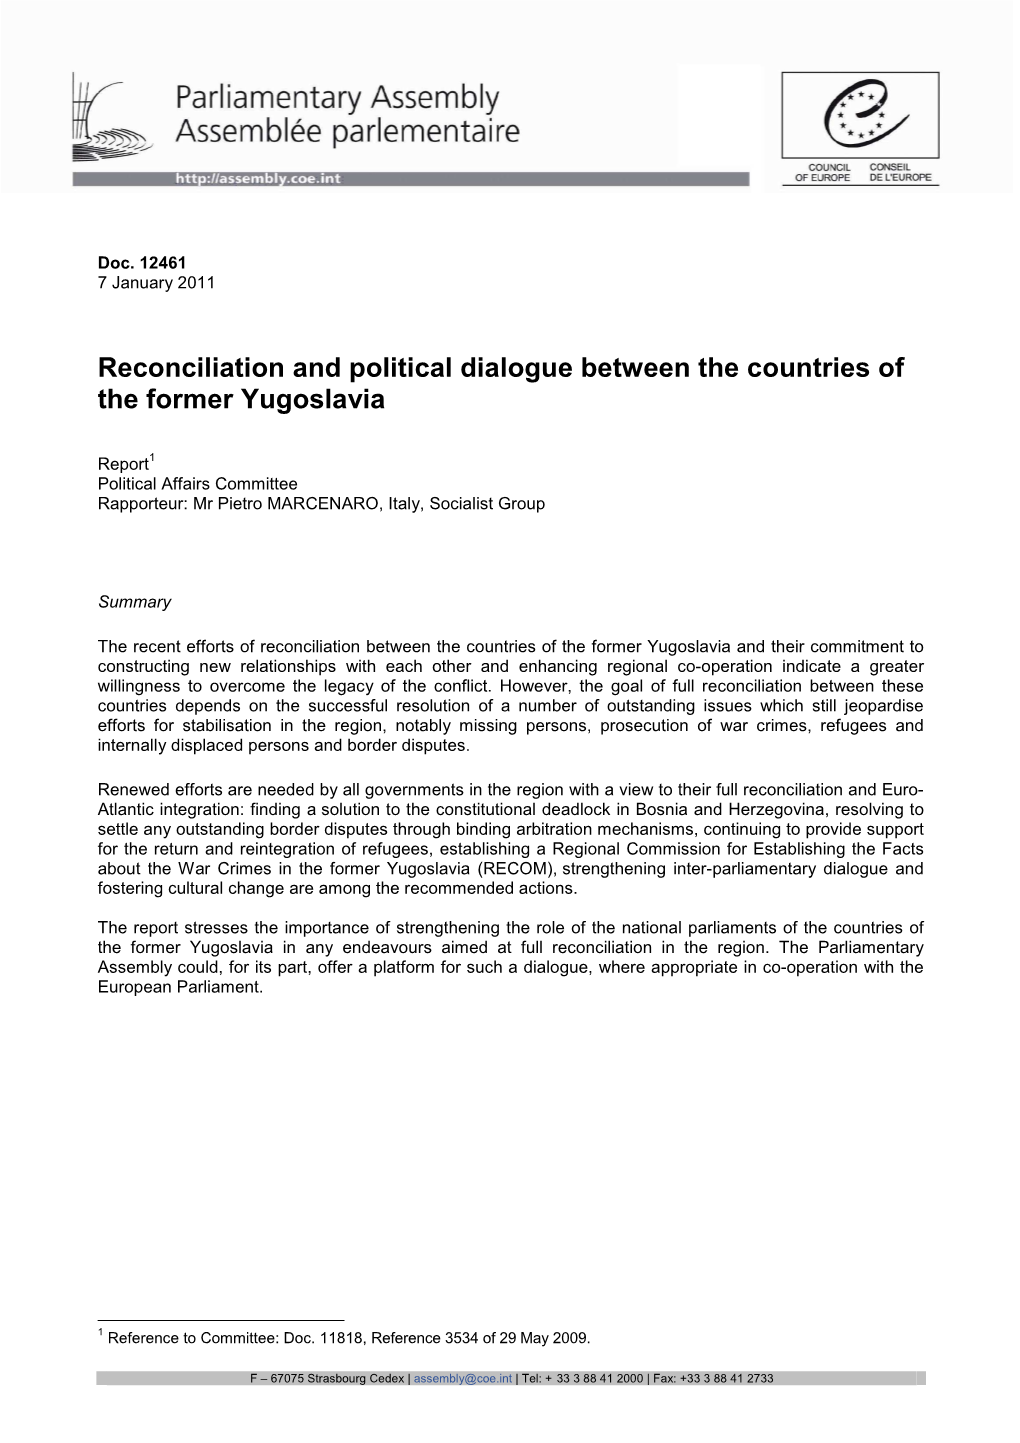 Reconciliation and Political Dialogue Between the Countries of the Former Yugoslavia